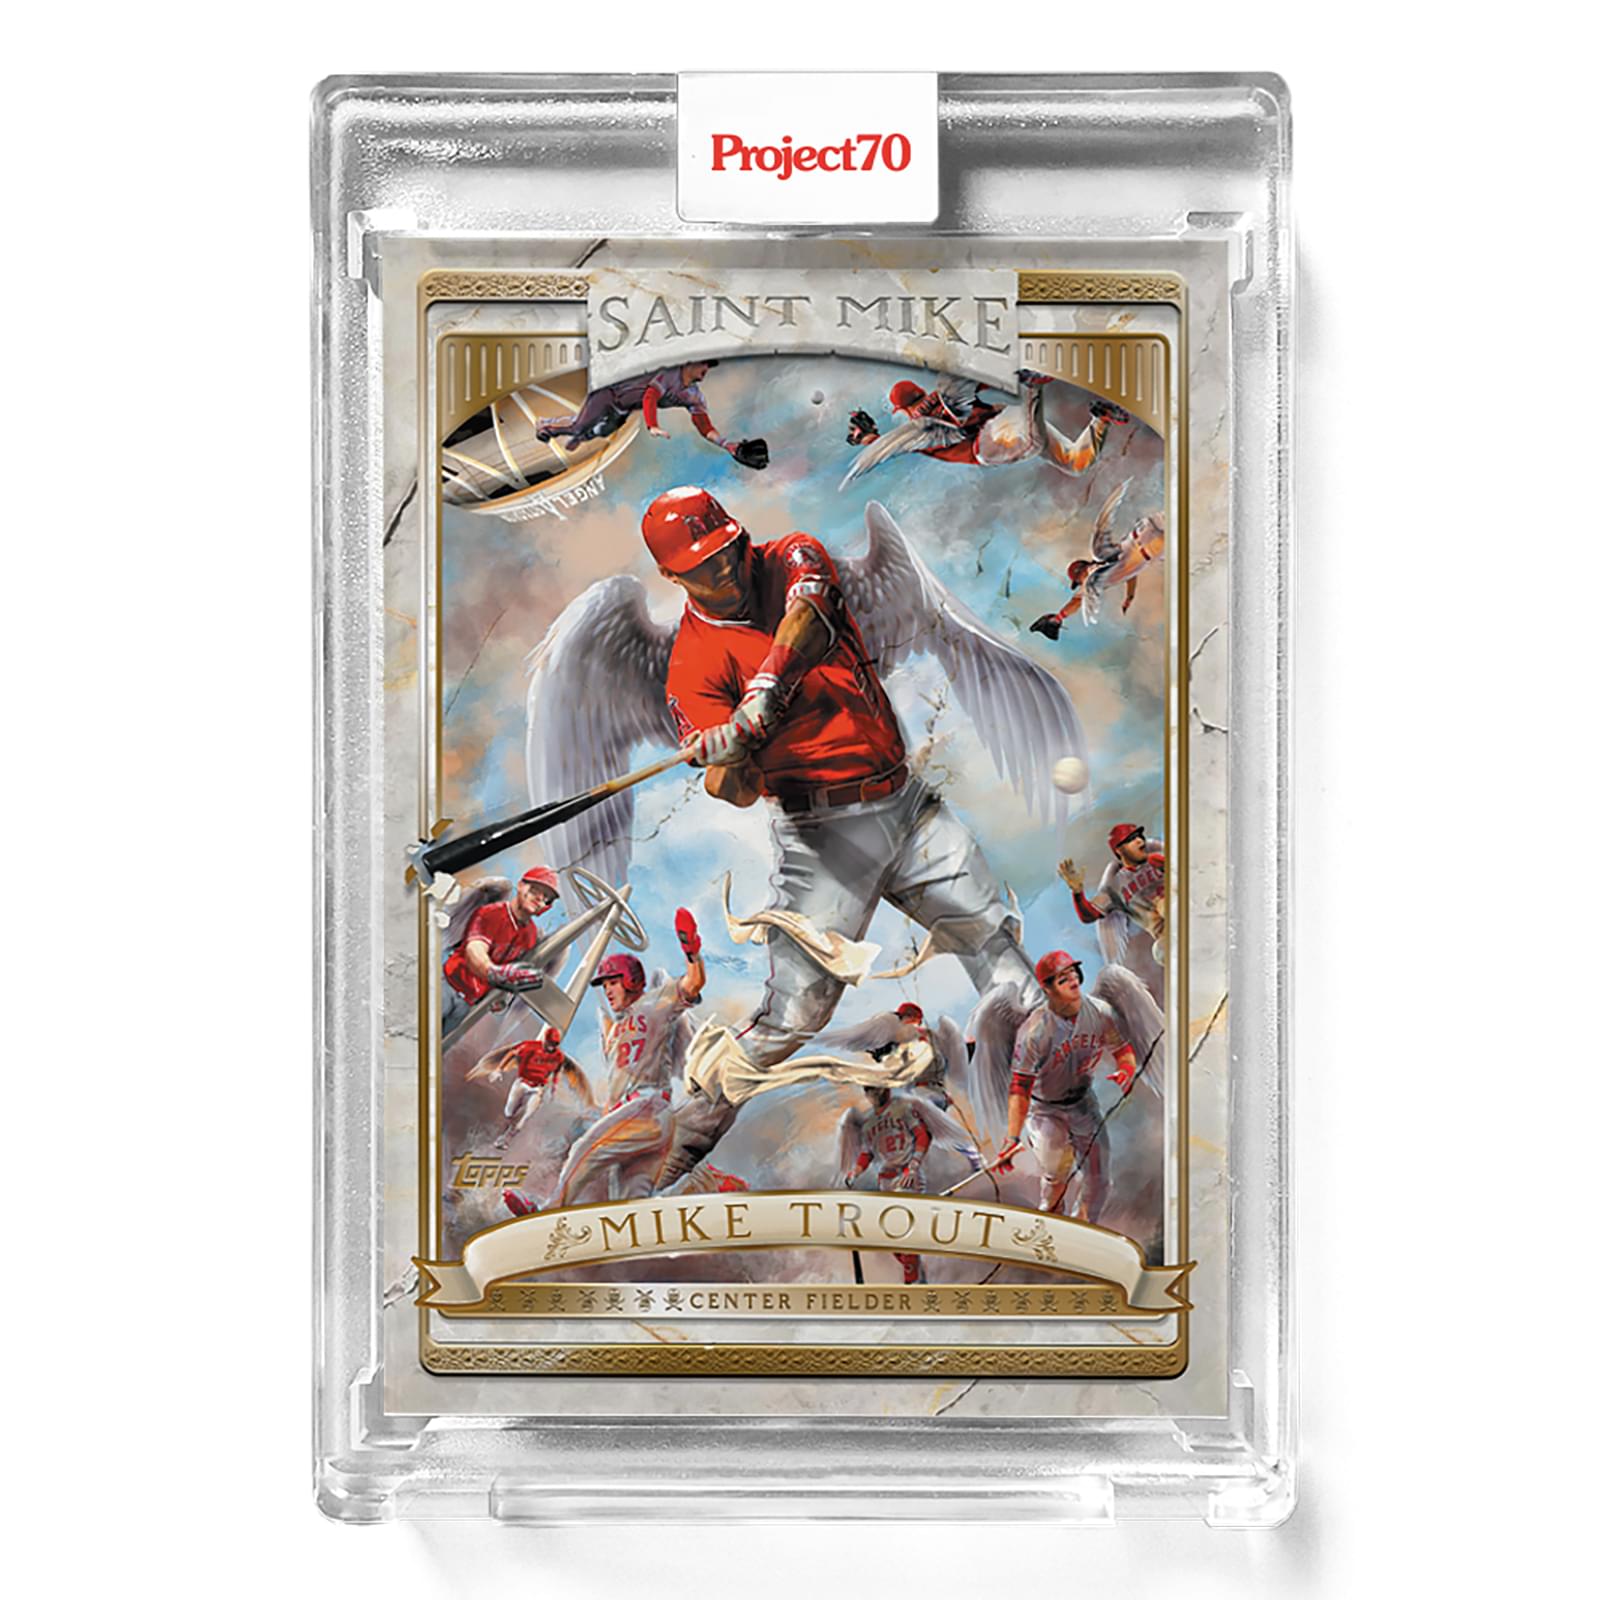 Topps Project70 Card 502 | Mike Trout 2006 by Shoe Surgeon